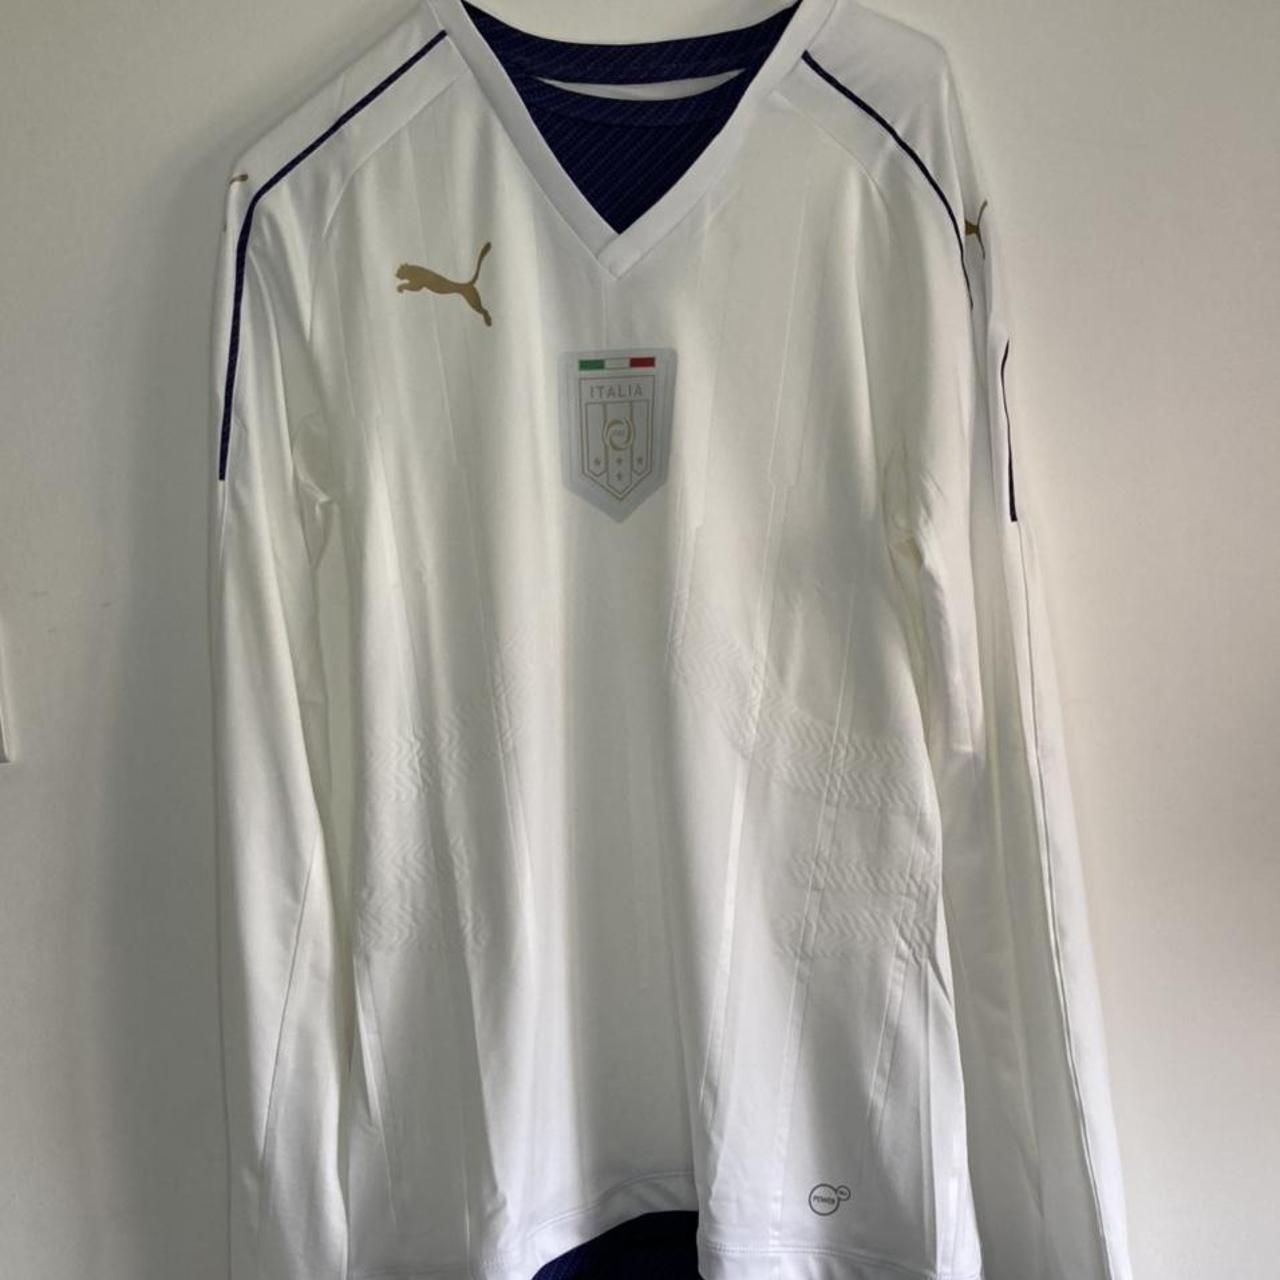 Away football shirt worn by Italy National Team in... - Depop